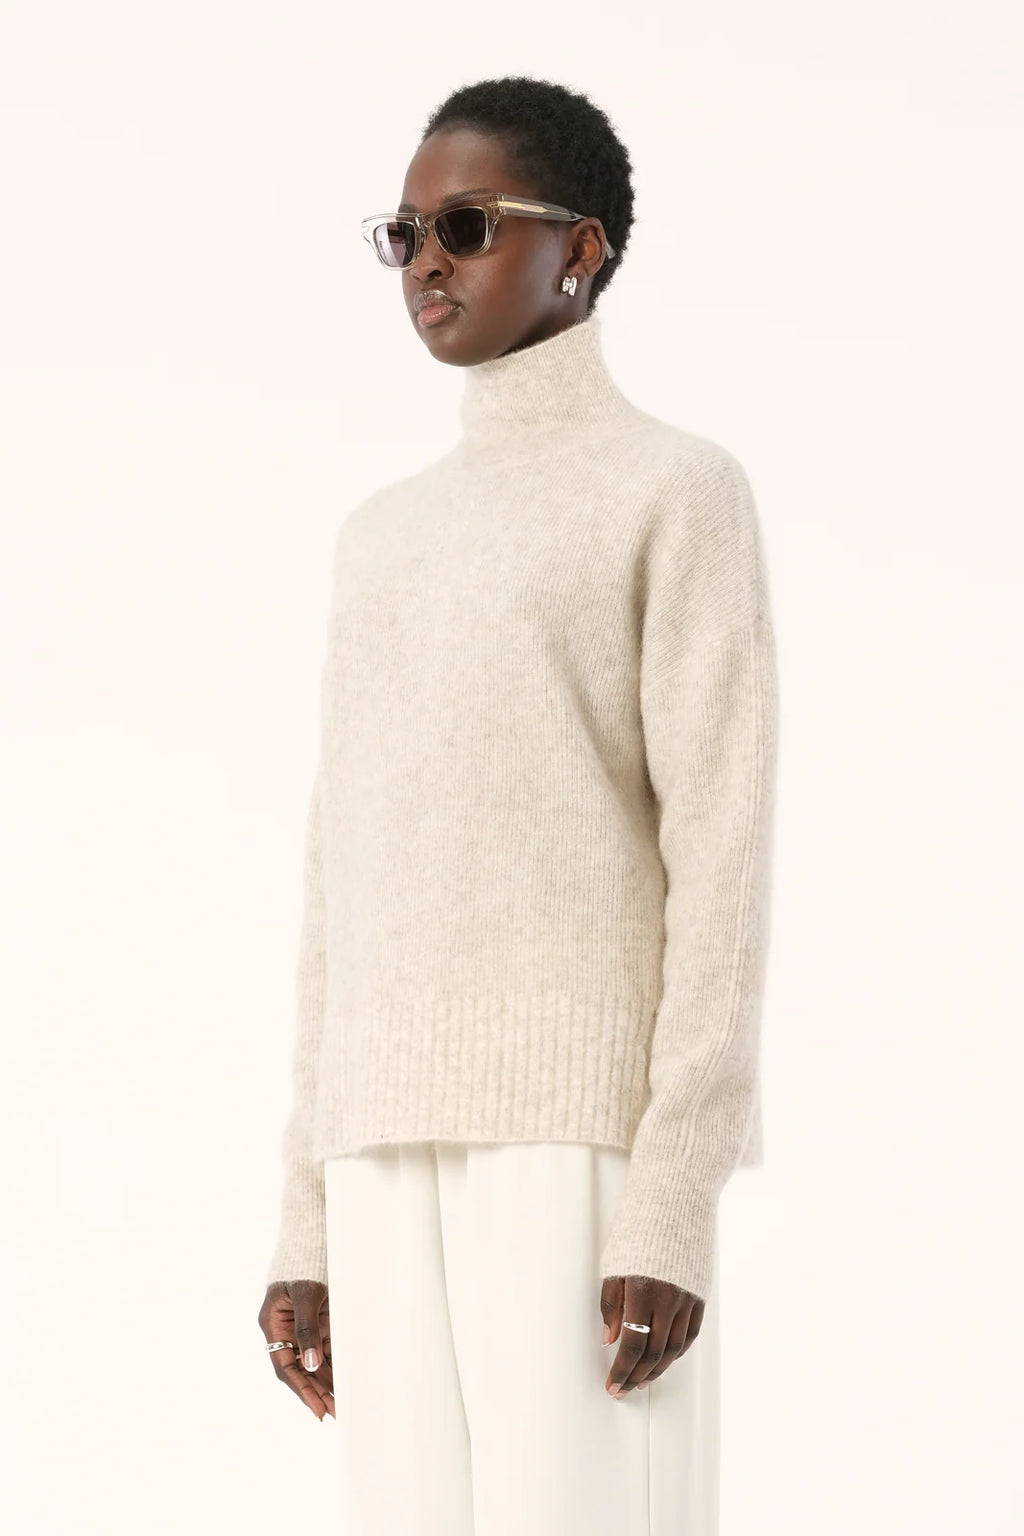 ELKA COLLECTIVE - Asta Knit - White Marle